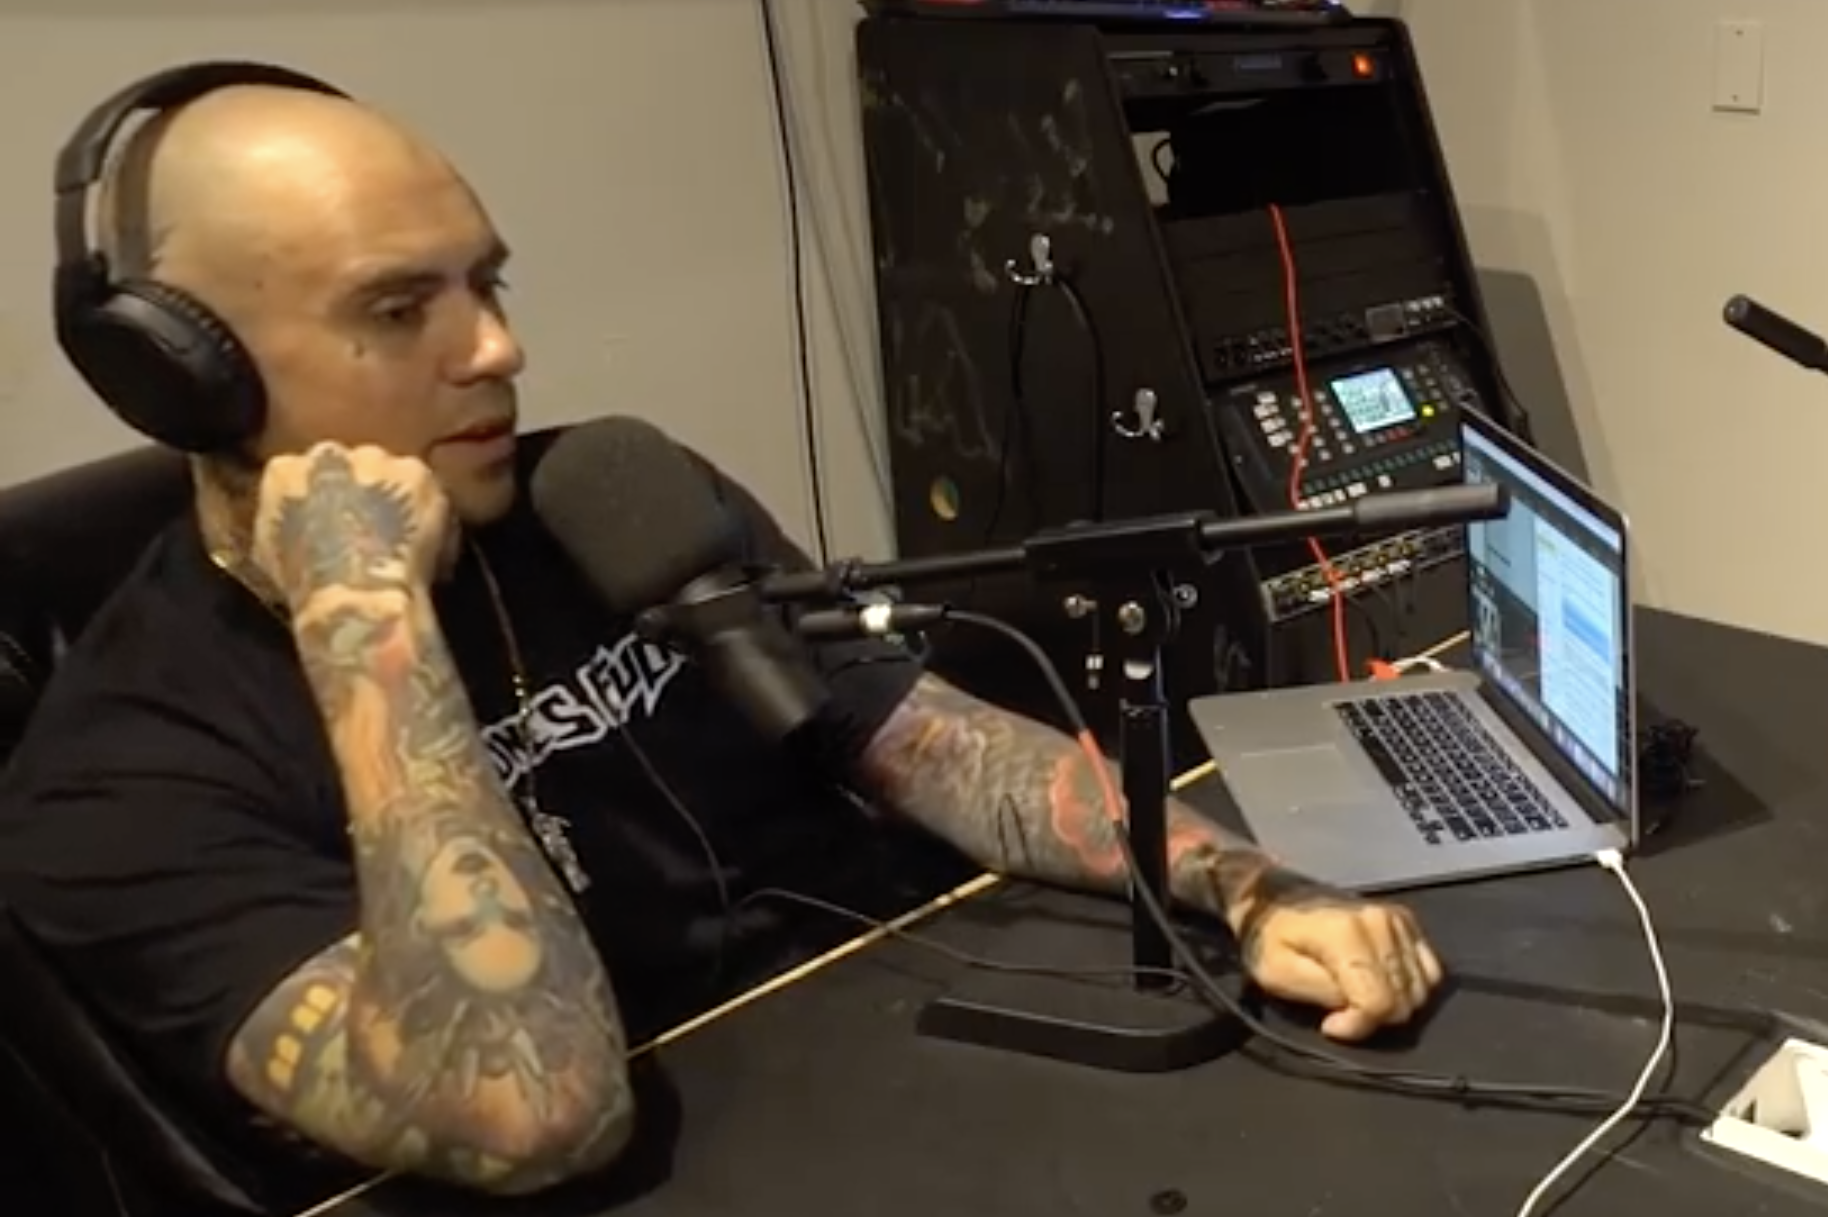 adam22-no-jumper-sexual-abuse-allegations-1540913793-compressed.png